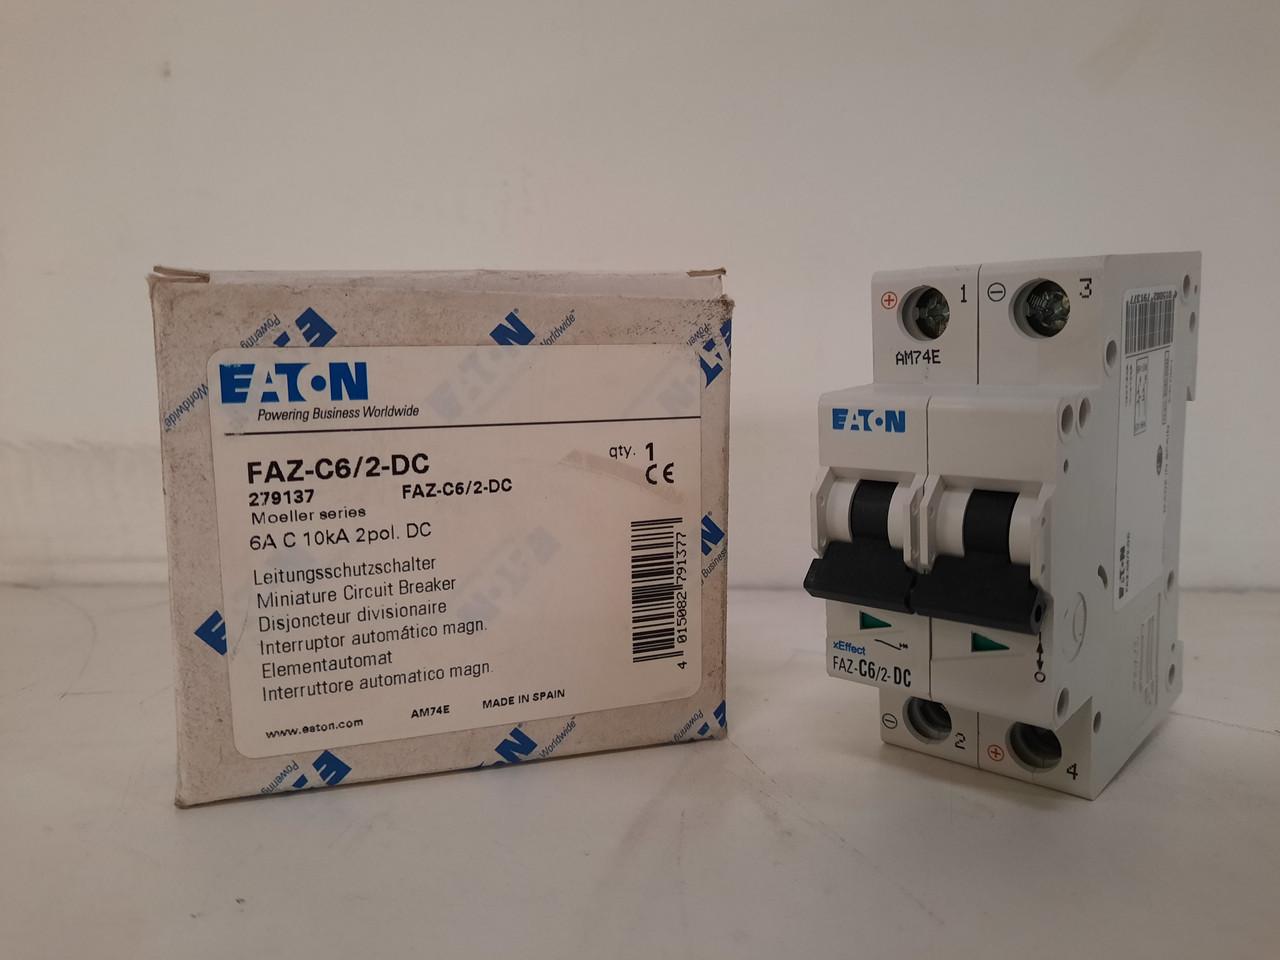 Eaton FAZ-C6/2-DC Eaton FAZ supplementary protector,UL 489 Industrial miniature circuit breaker - supplementary protector,Medium levels of inrush current are expected,6 A,10 kAIC,Two-pole,125 Vdc per pole,5-10X /n,50-60 Hz,Standard terminals,C Curve